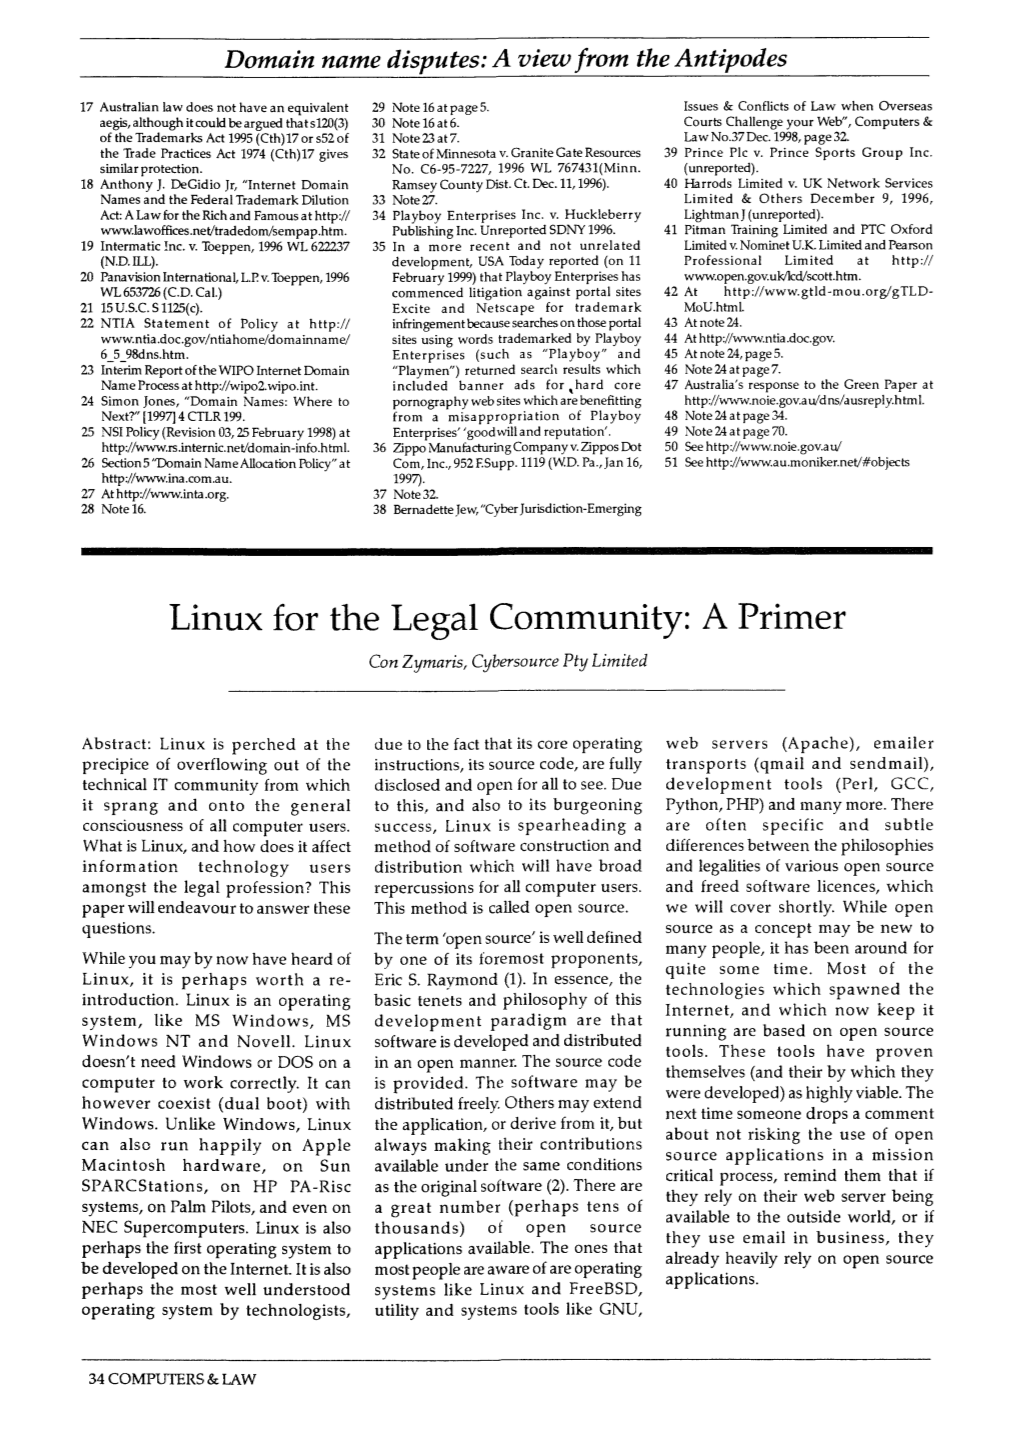 Linux for the Legal Community: a Primer